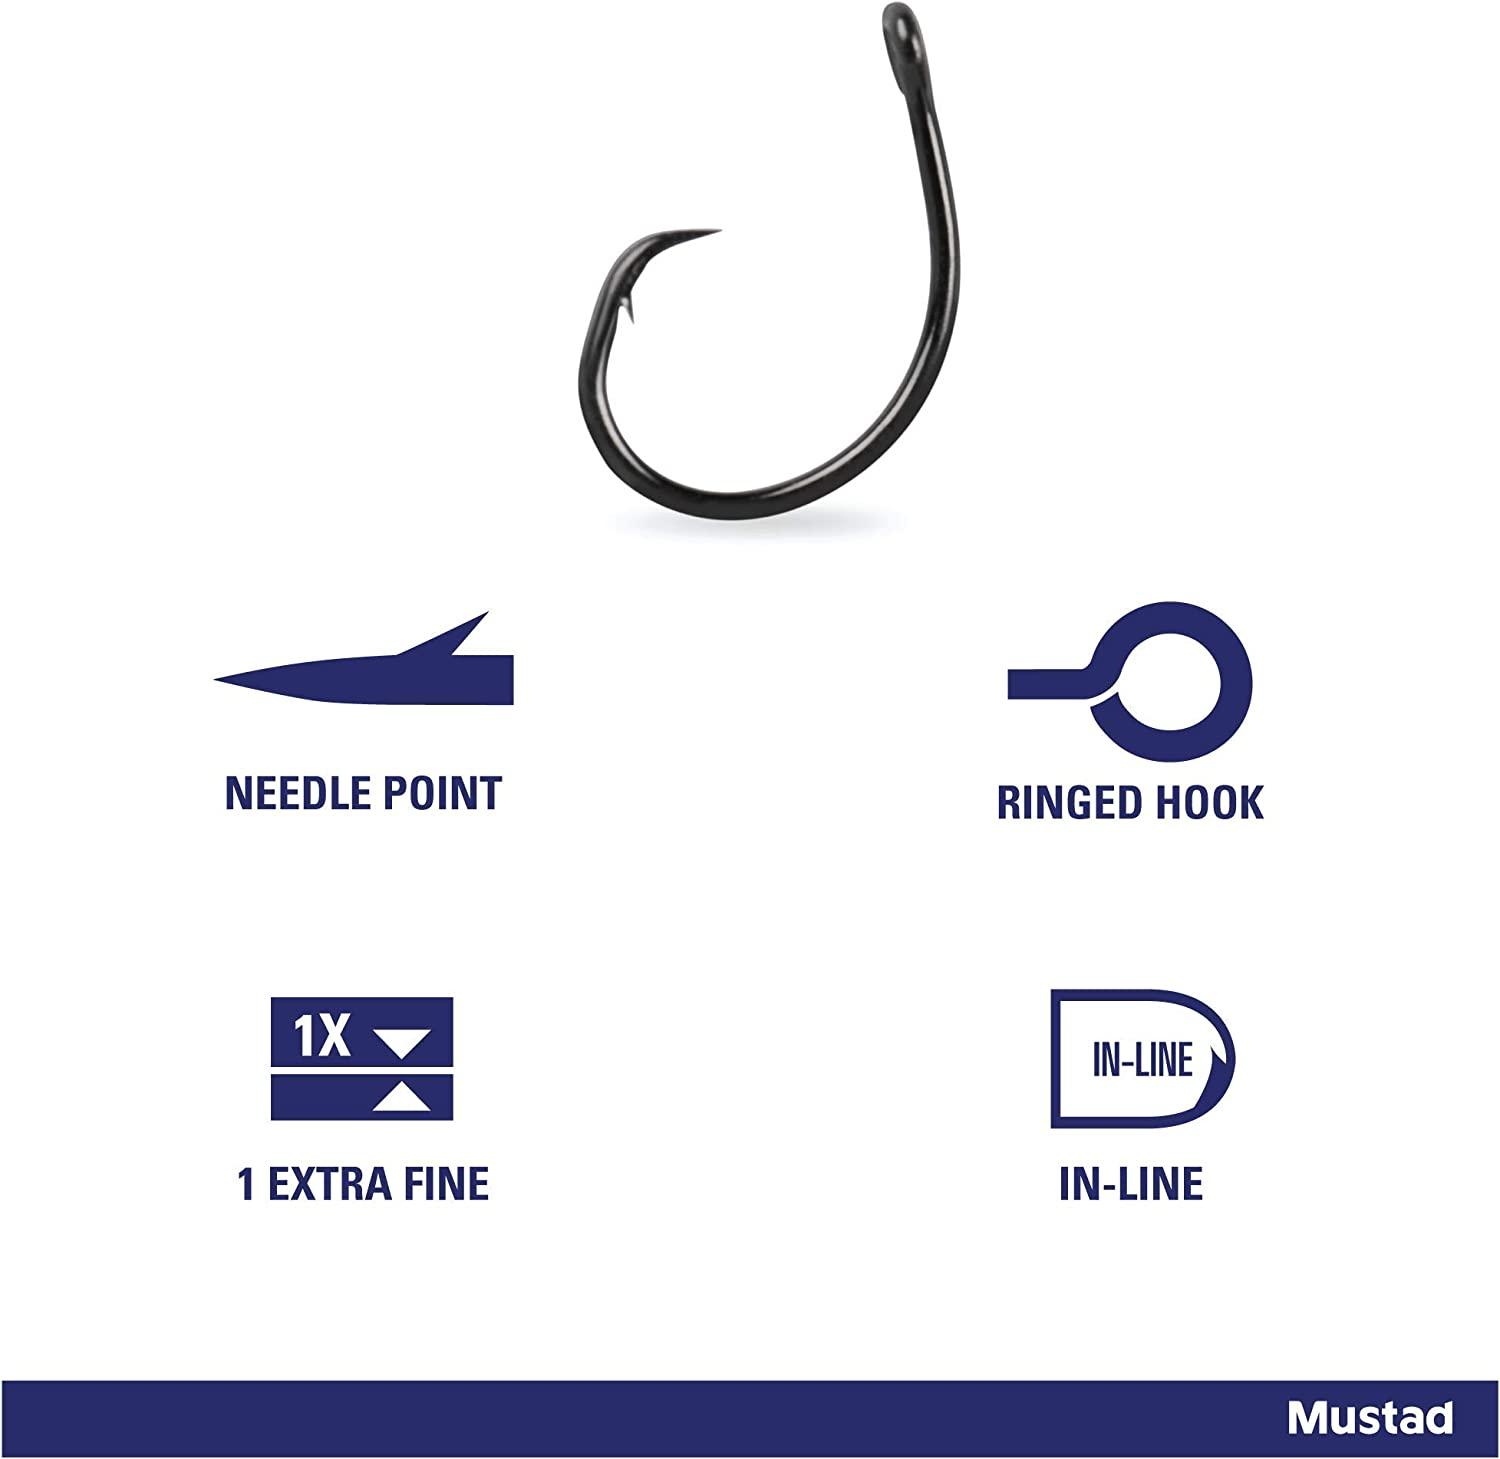 Stellar UltraPoint Wide Gap 7/0 (100 Pack) Circle Hook, Offset Circle Extra  Fine Wire Hook for Catfish, Carp, Bluegill to Tuna. Saltwater or Freshwater Fishing  Hooks, Gear and Equipment 